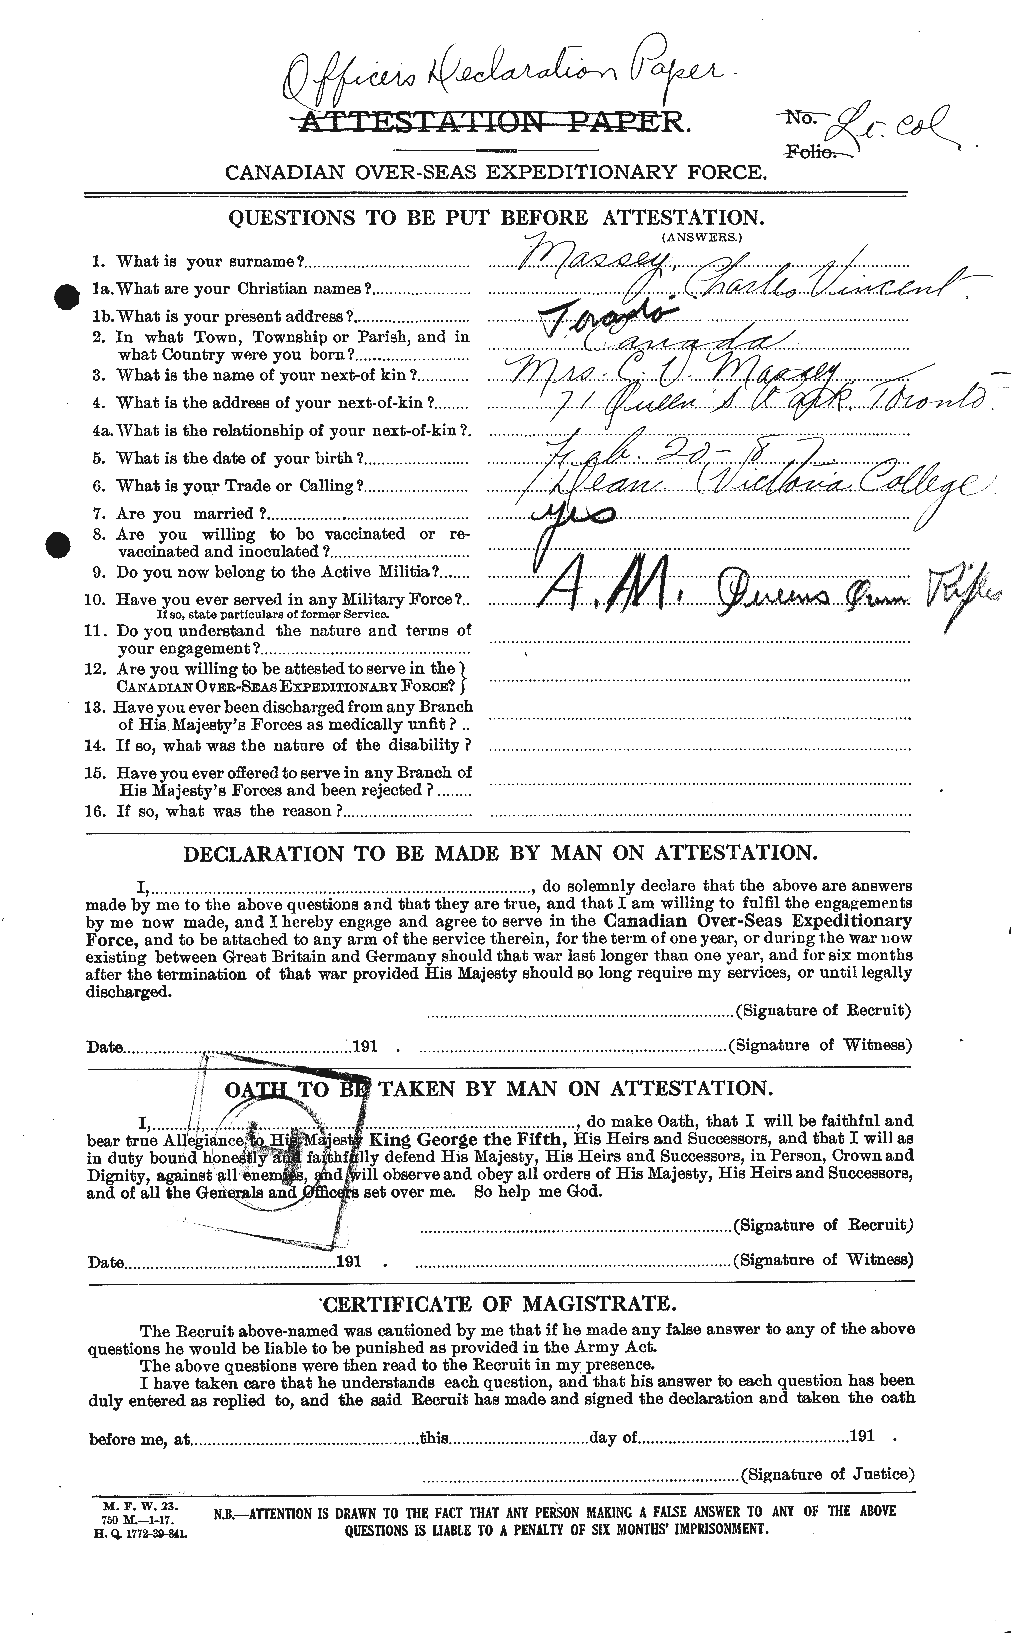 Personnel Records of the First World War - CEF 206310a